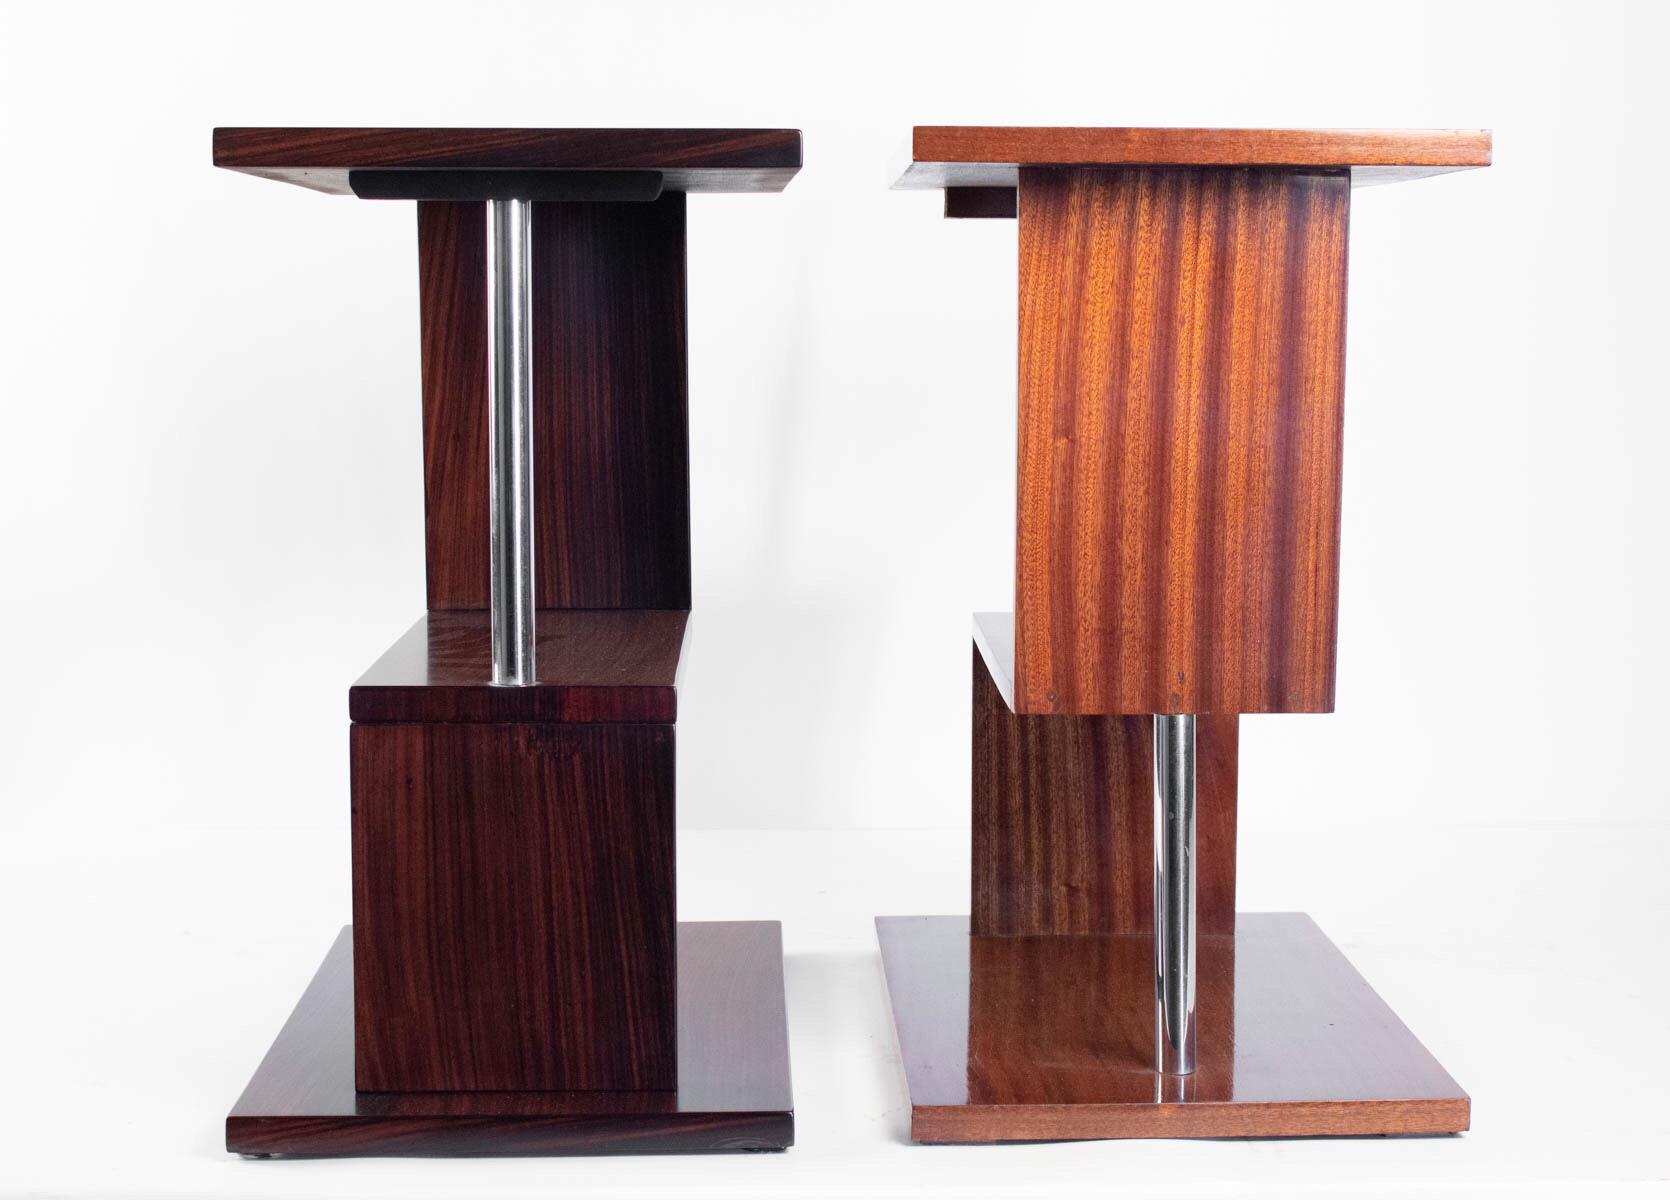 Fabulous set of two fruitwood side tables, Art Deco style, France, 20th century. 
One is lighter toned than the other.